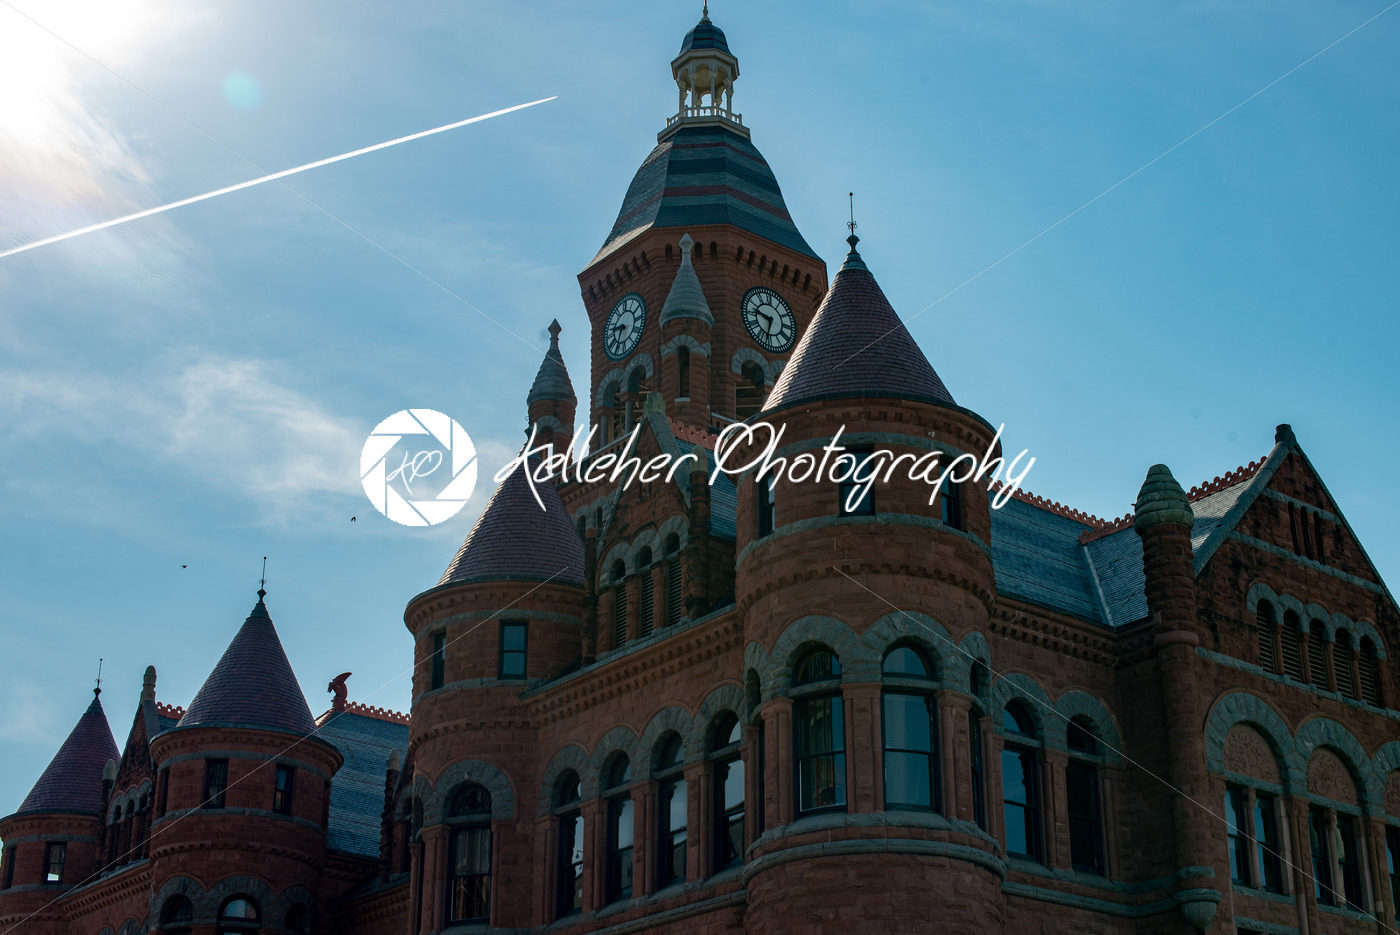 Dallas, Texas – May 7, 2018: Old Red Museum, formerly Dallas County Courthouse in Dallas, Texas - Kelleher Photography Store